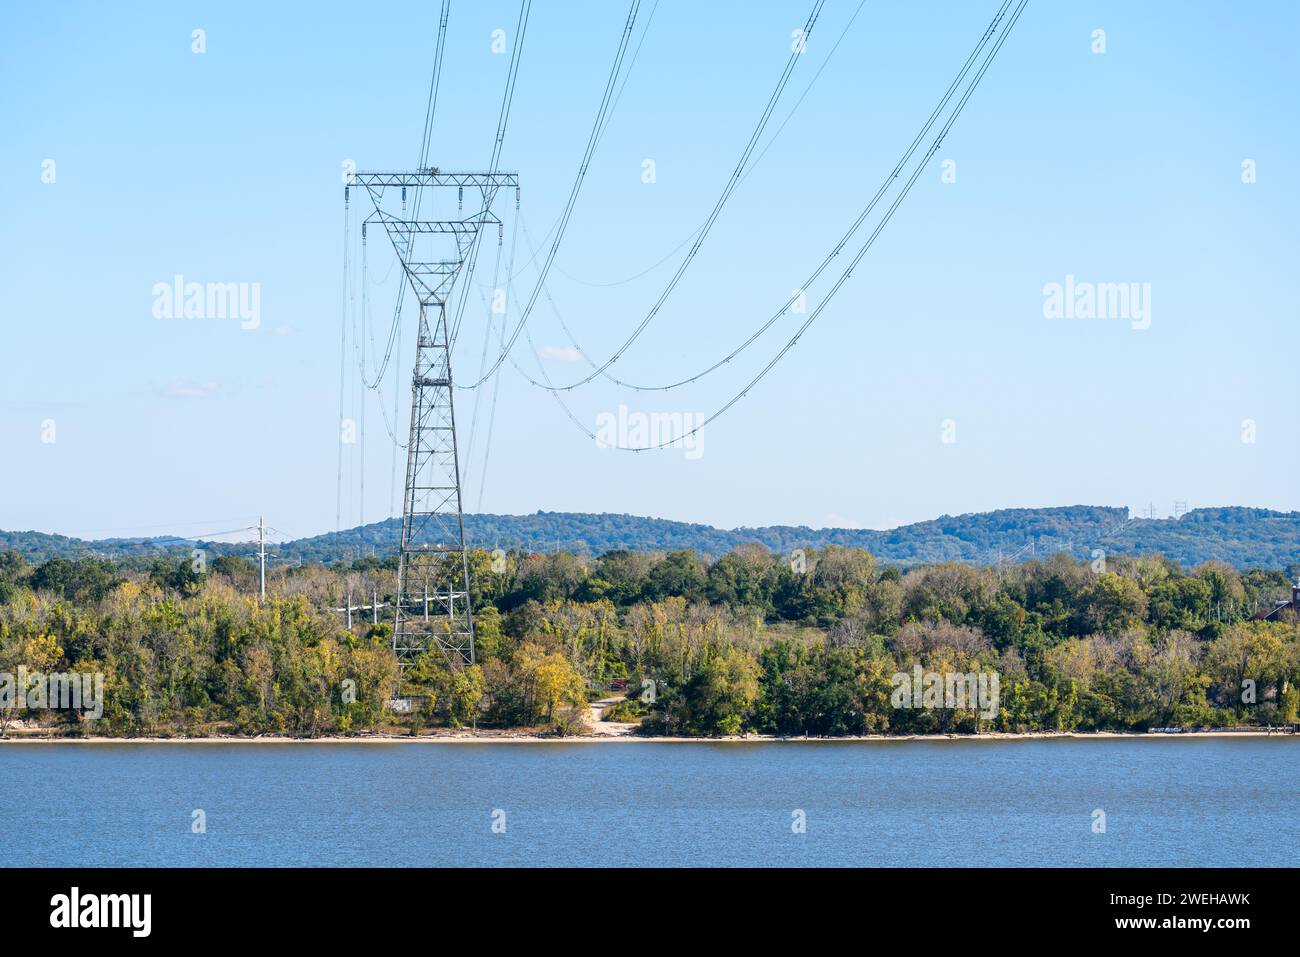 Tall electricity pylon supporting high voltage lines on the bank of a river on a sunny autumn day Stock Photo